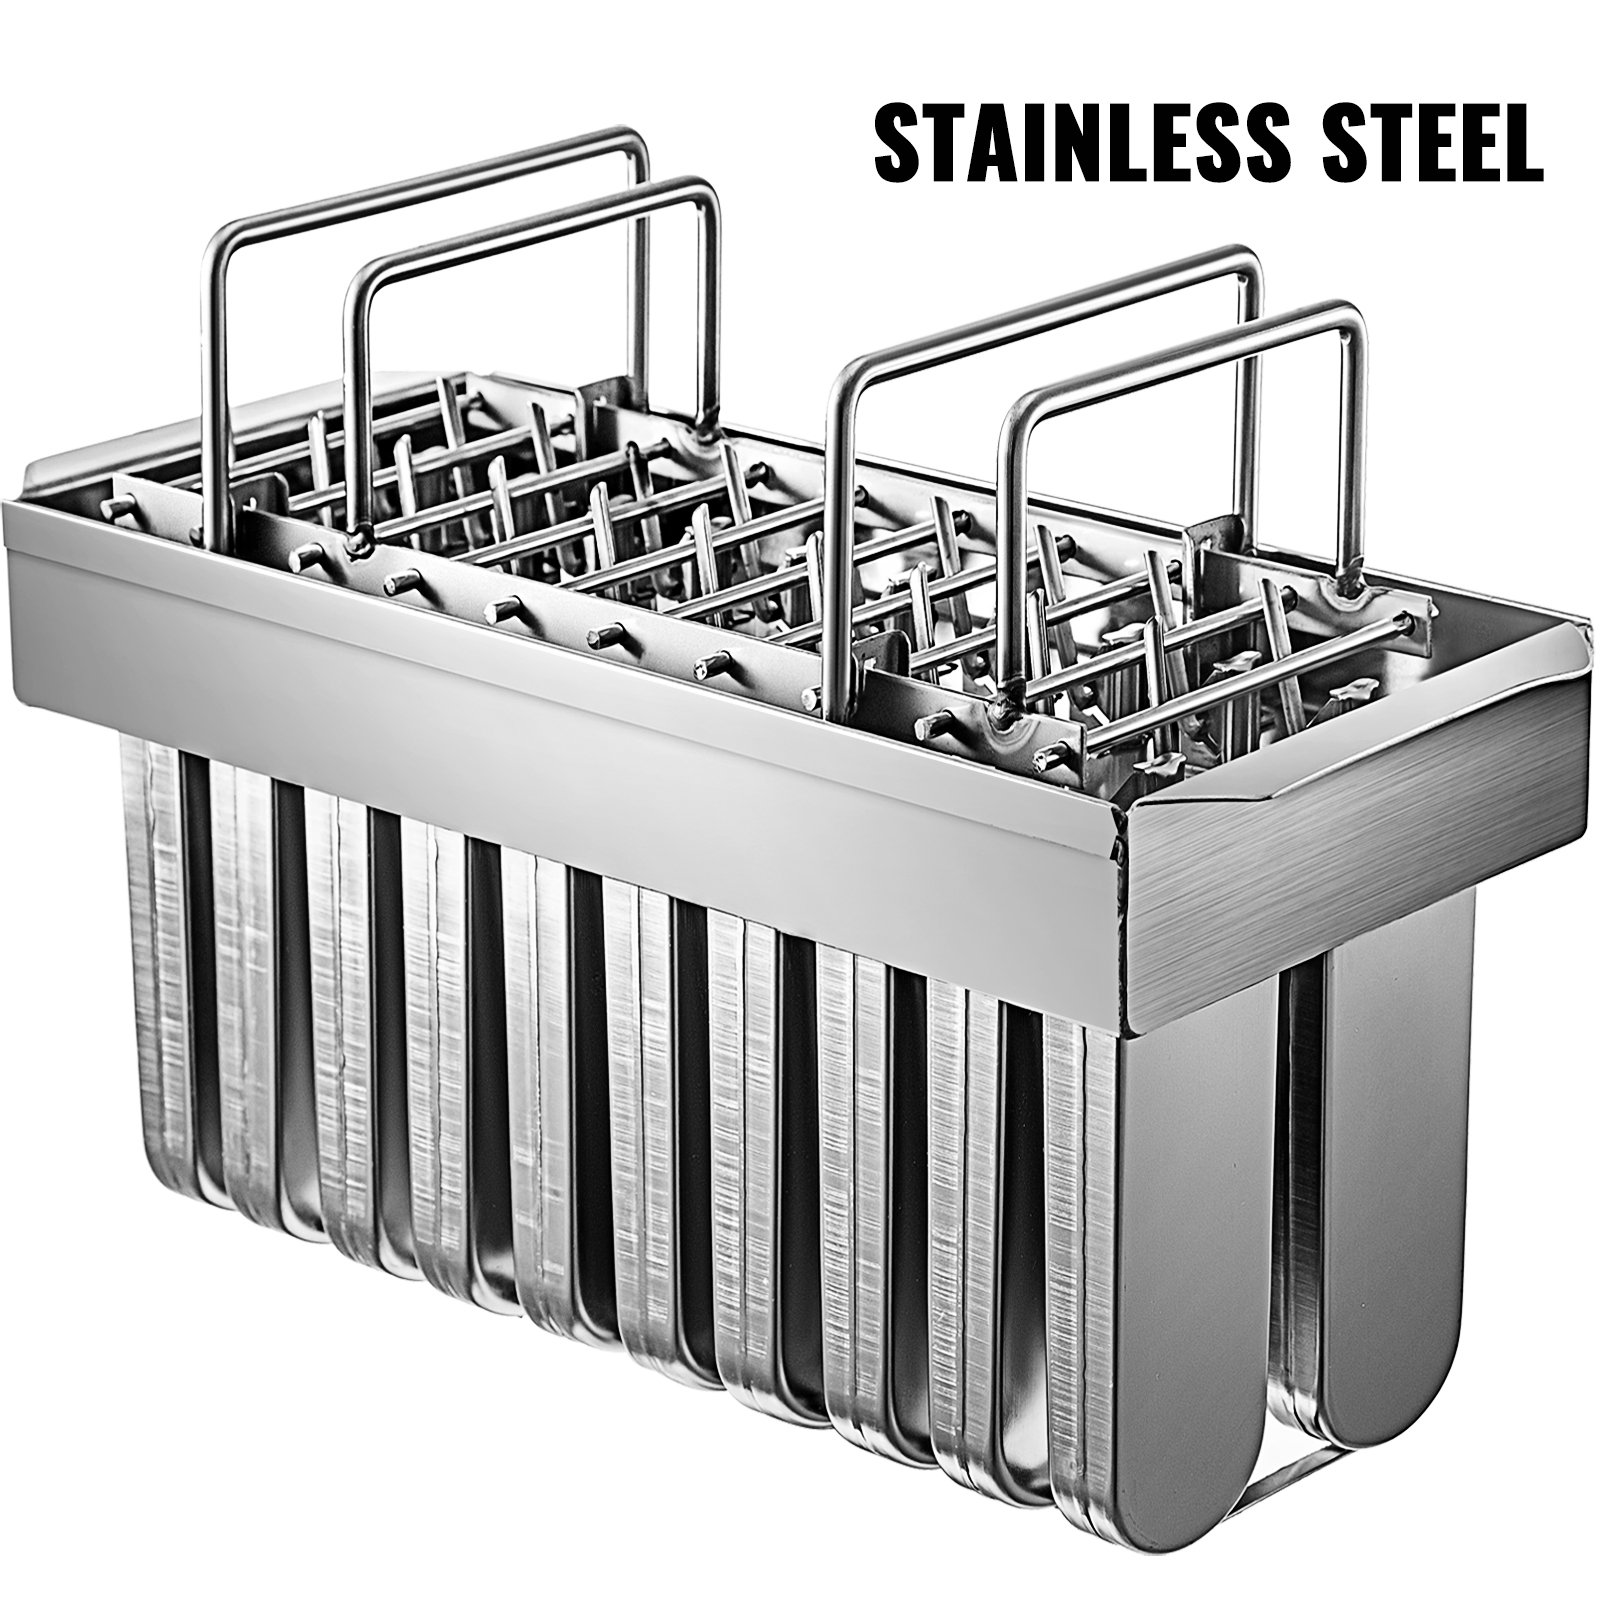 https://d2qc09rl1gfuof.cloudfront.net/product/XGMJPBYT20PCS0001/stainless-popsicle-molds-m100-2.jpg